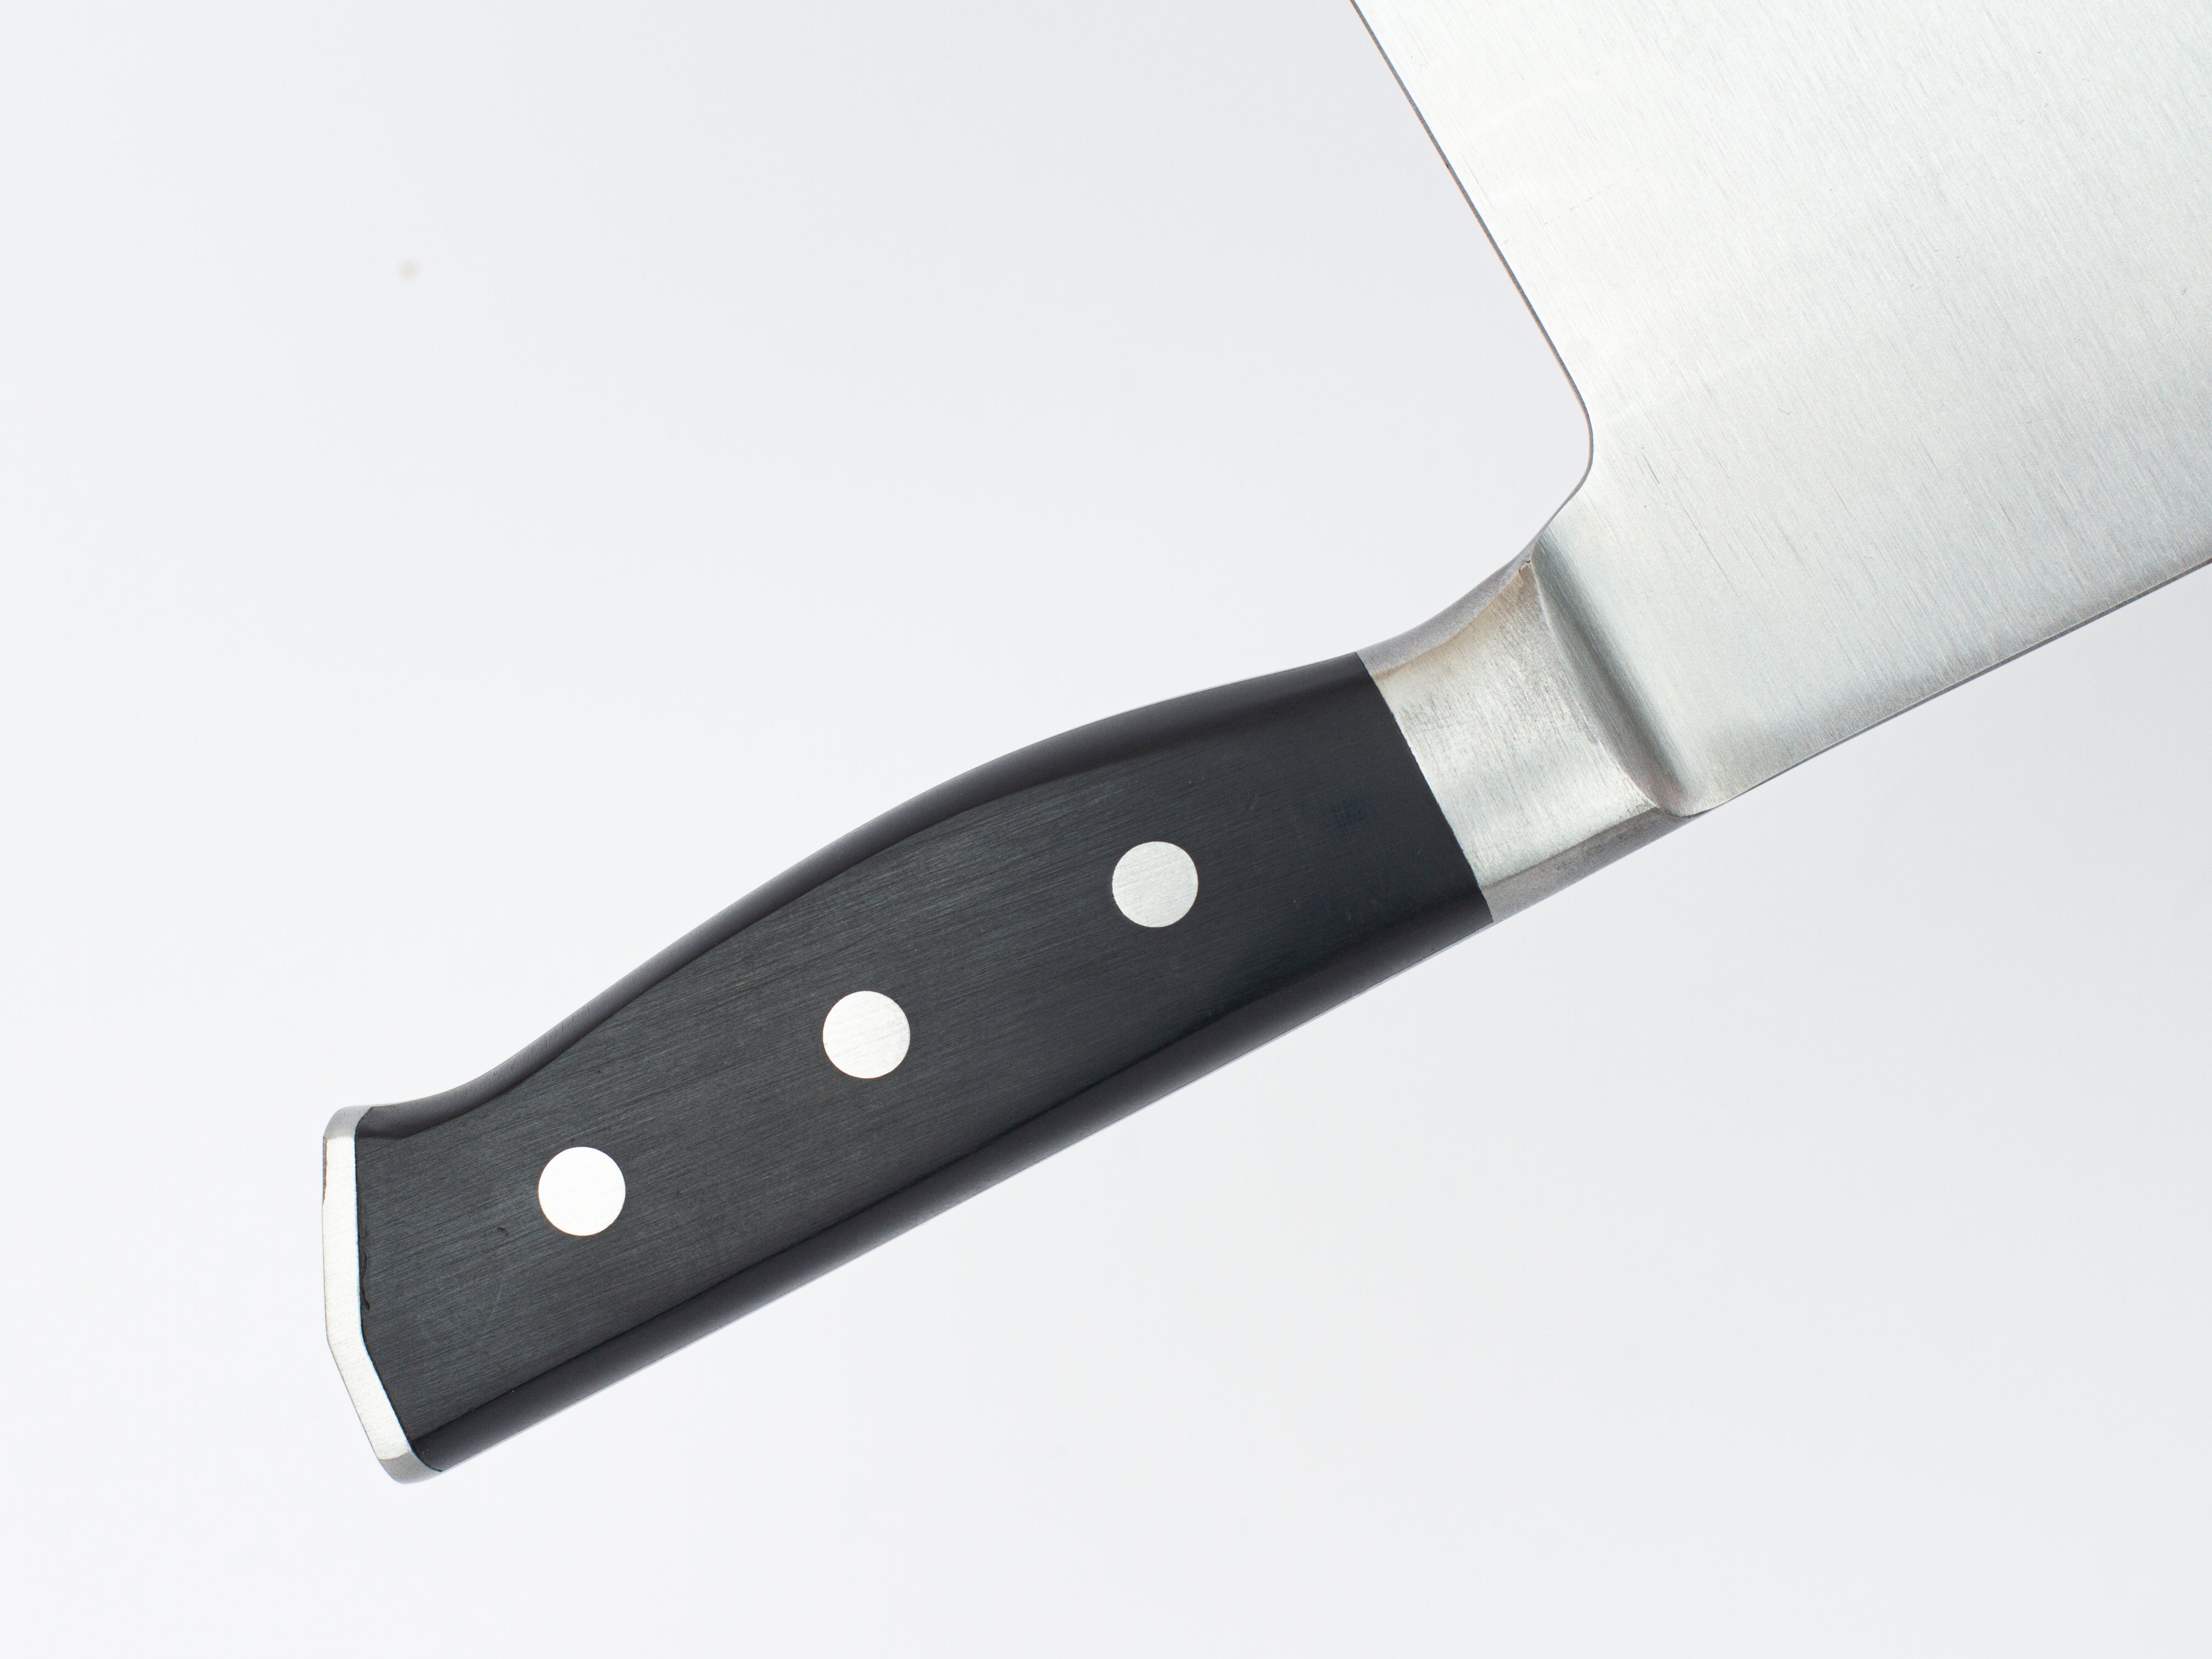 ZWILLING Pro 7-inch, Chinese Chef's Knife/Vegetable Cleaver